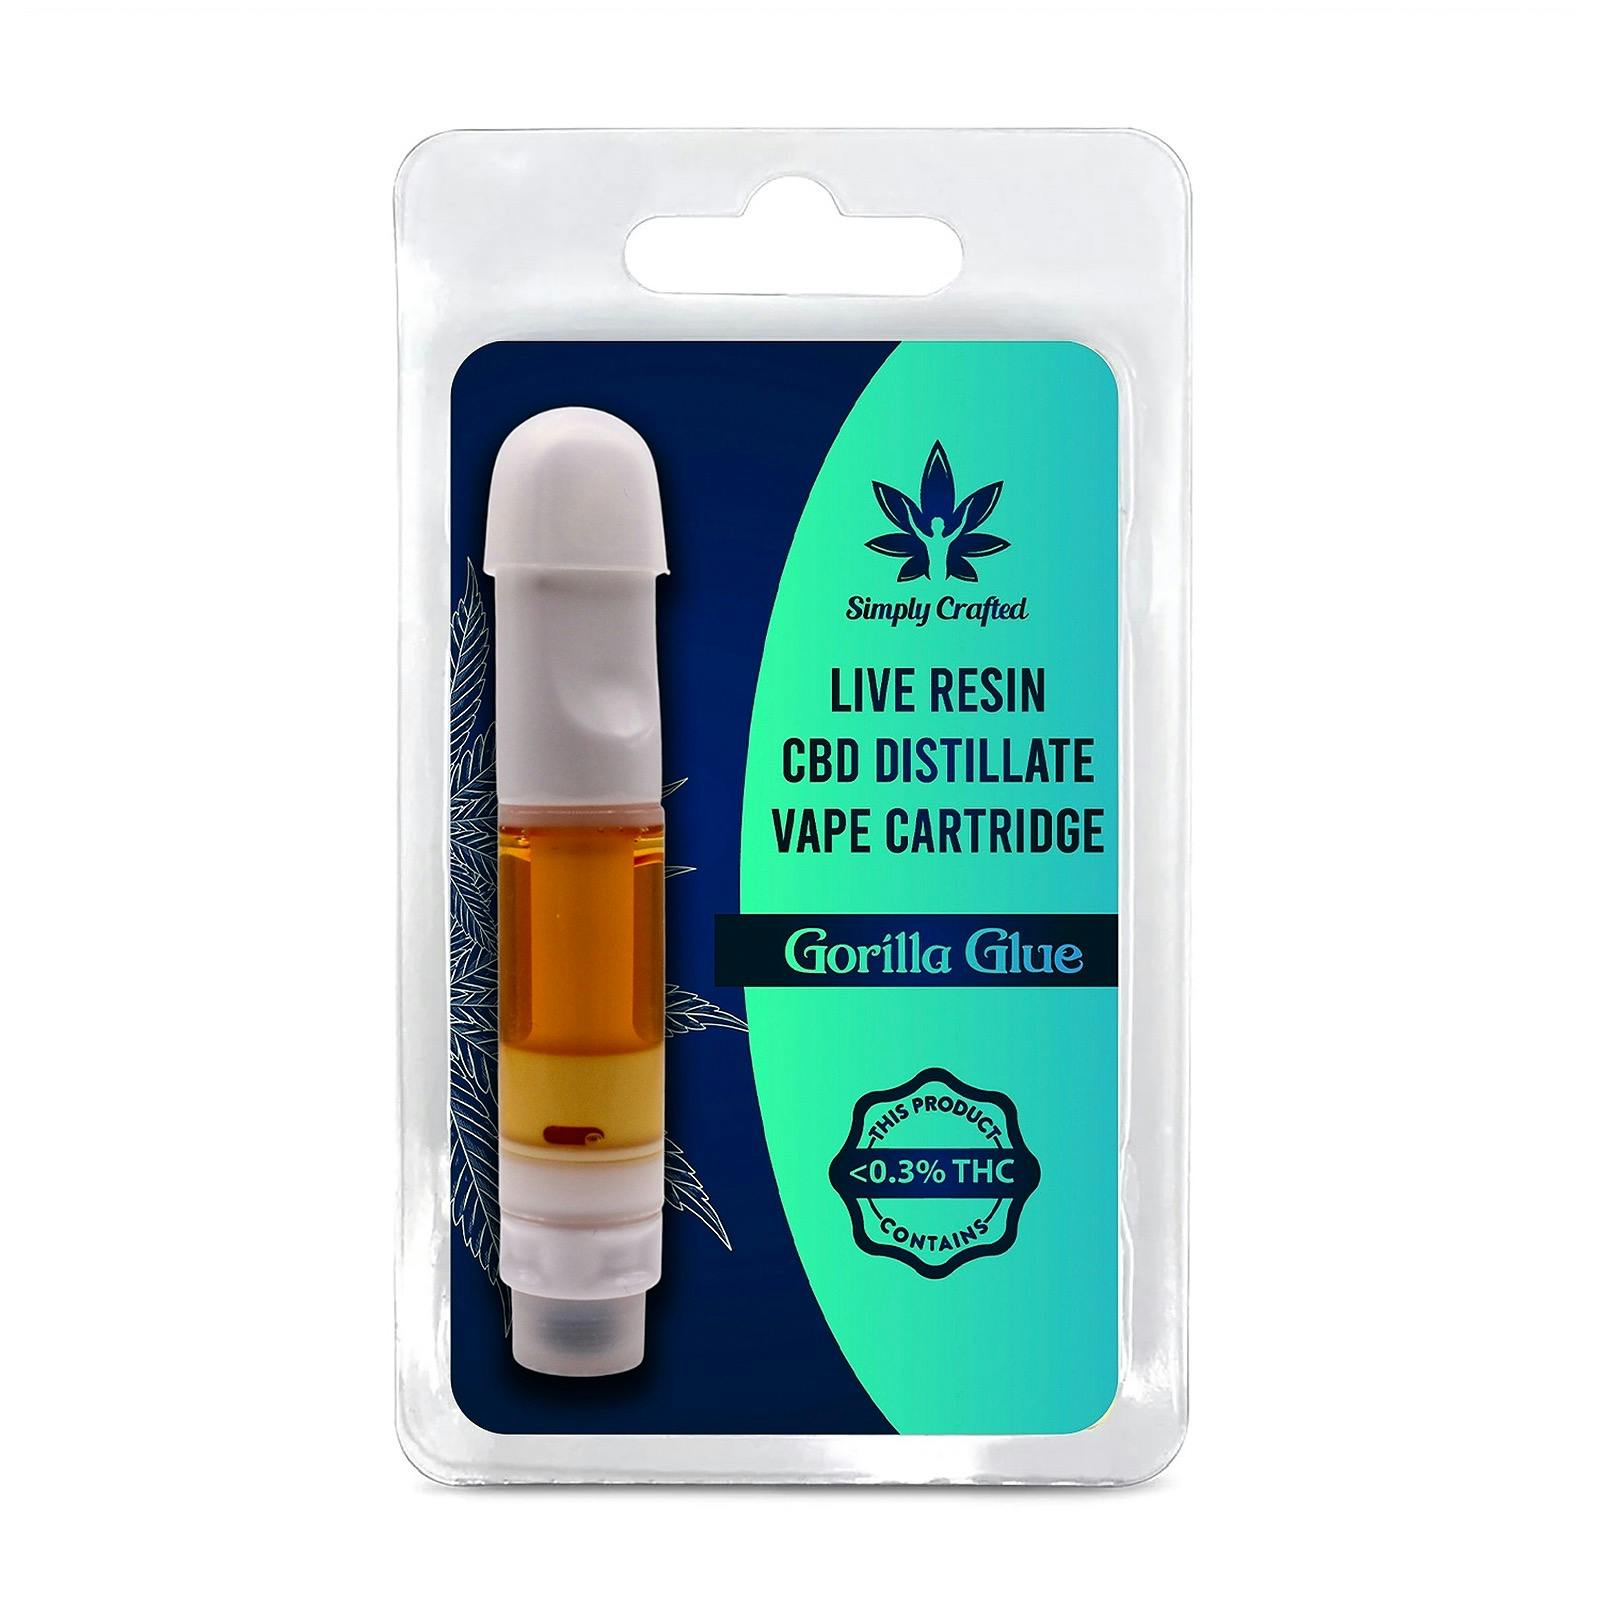 Simply Crafted Free Shipping Save 25 With Code Leafly Gorilla Glue Live Resin Cbd 4702